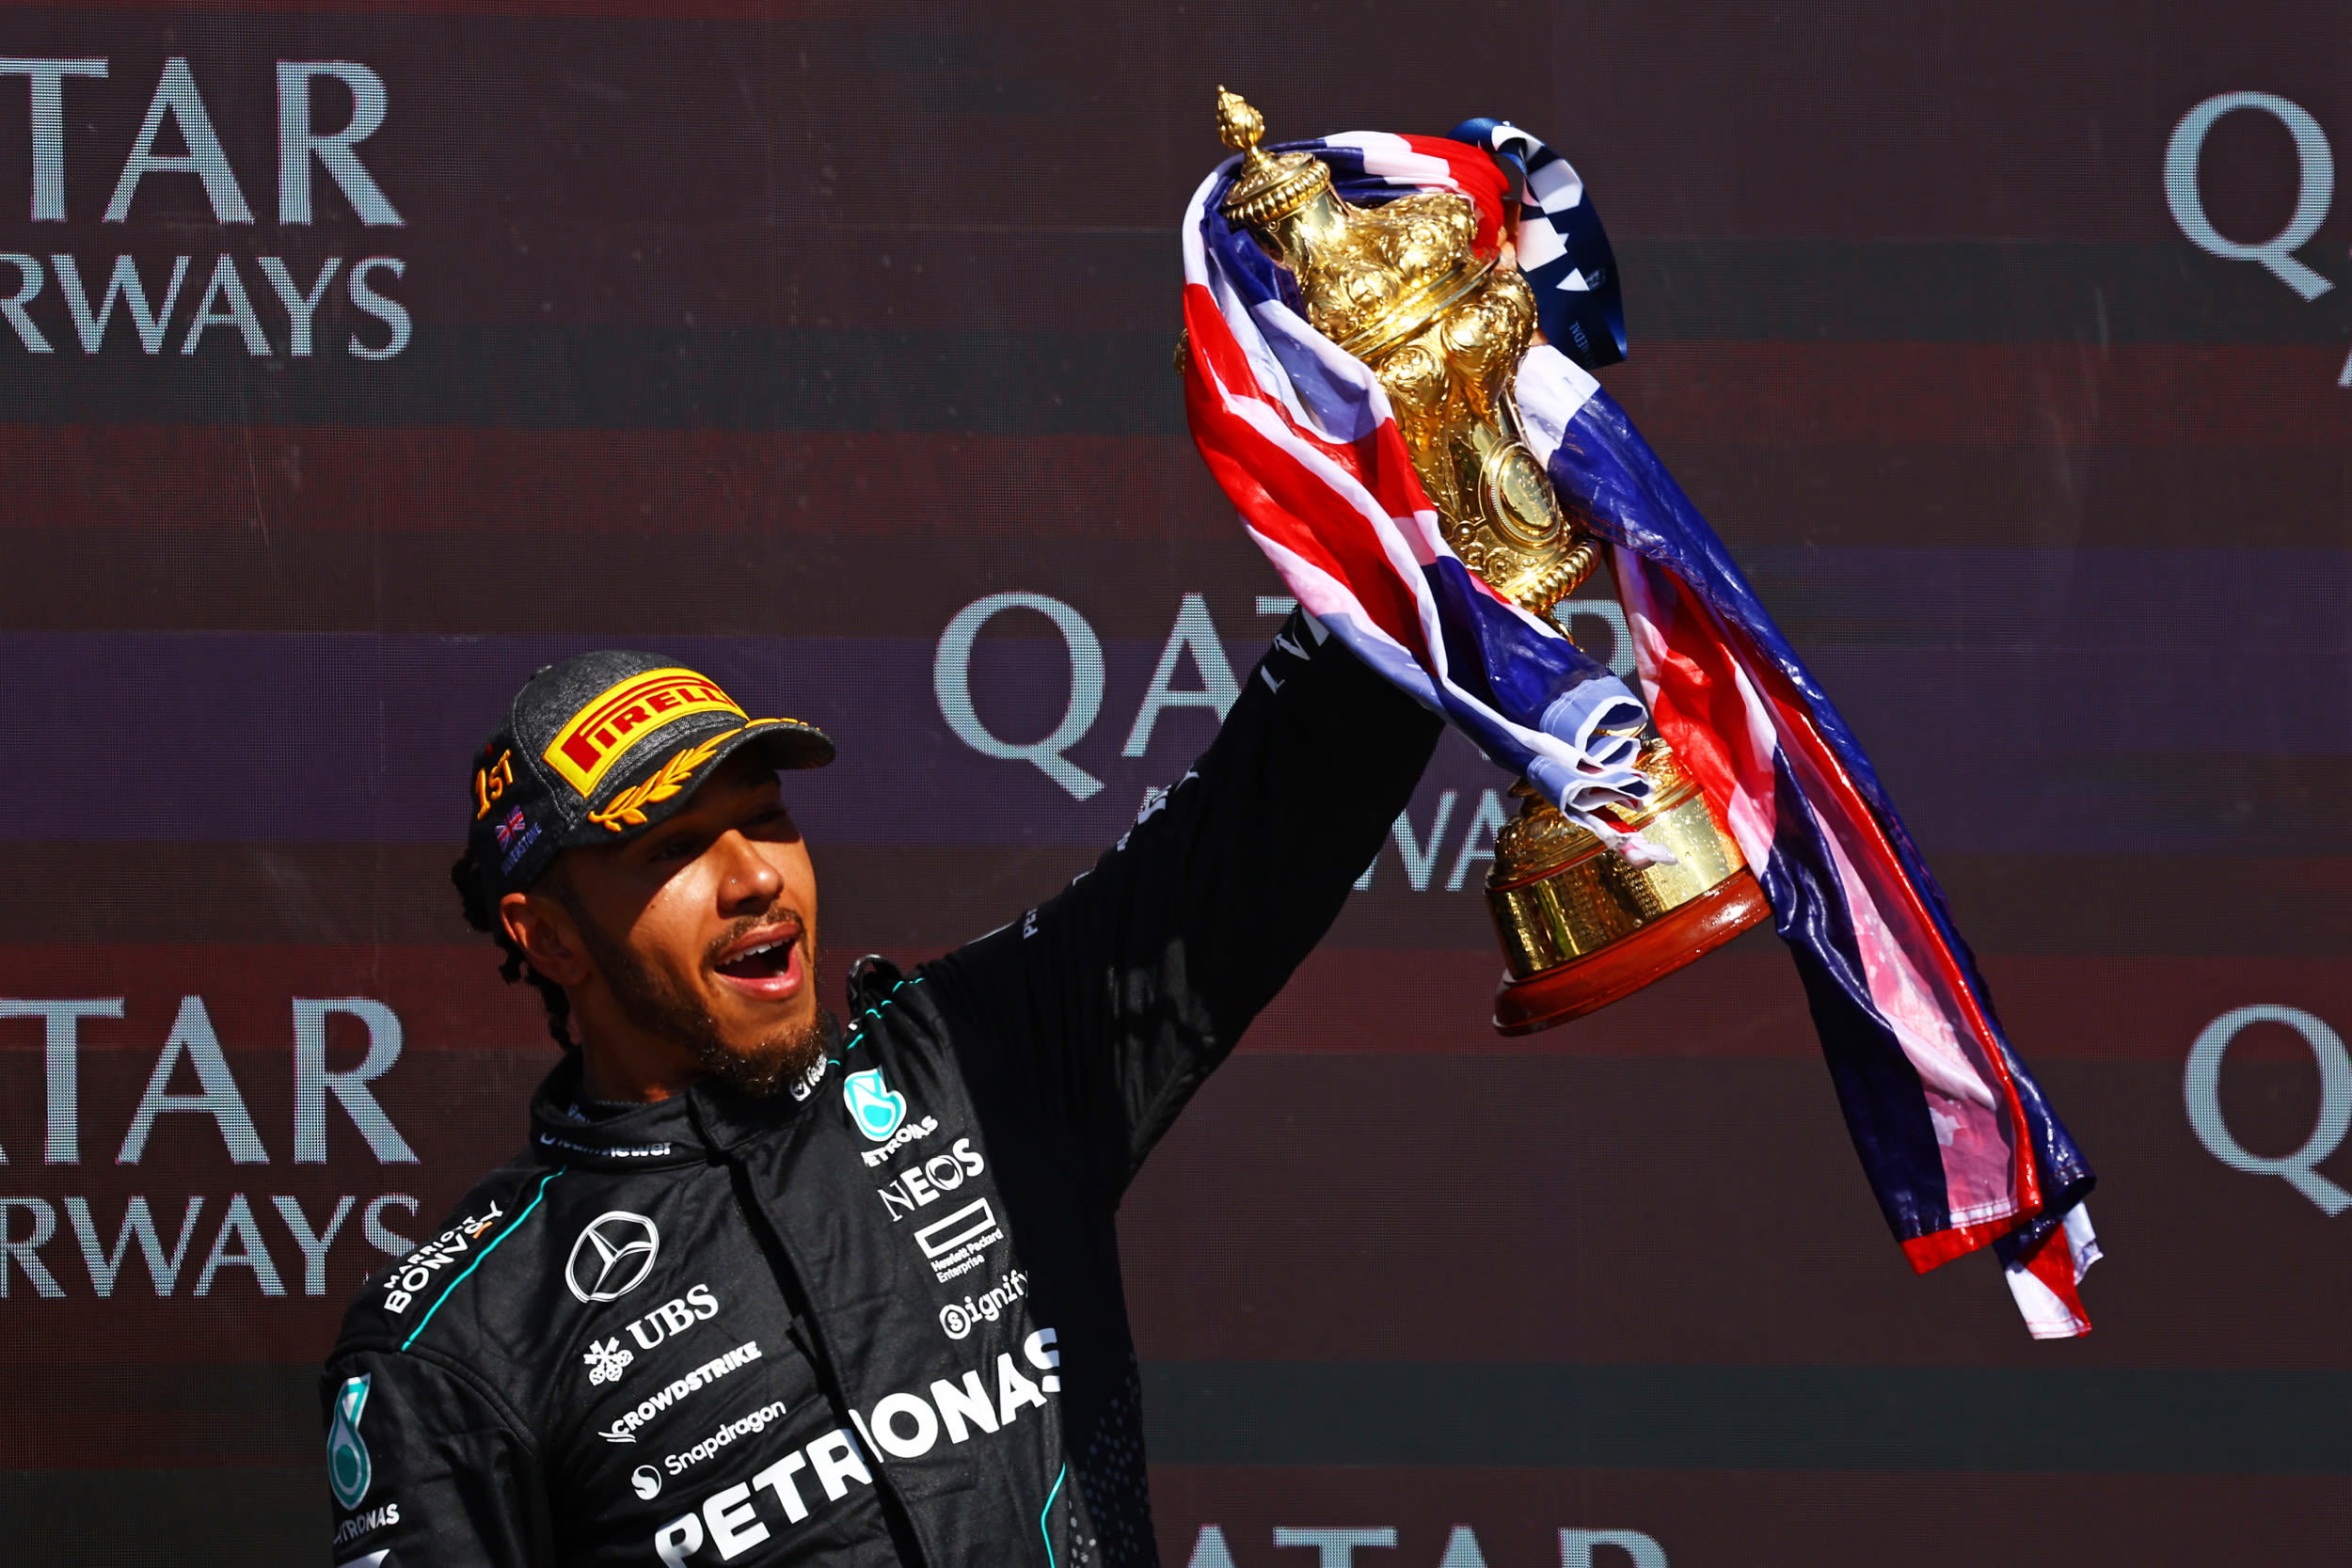 Lewis Hamilton Speaks Out On 'Daunting' Ferrari Move After Mercedes Victory